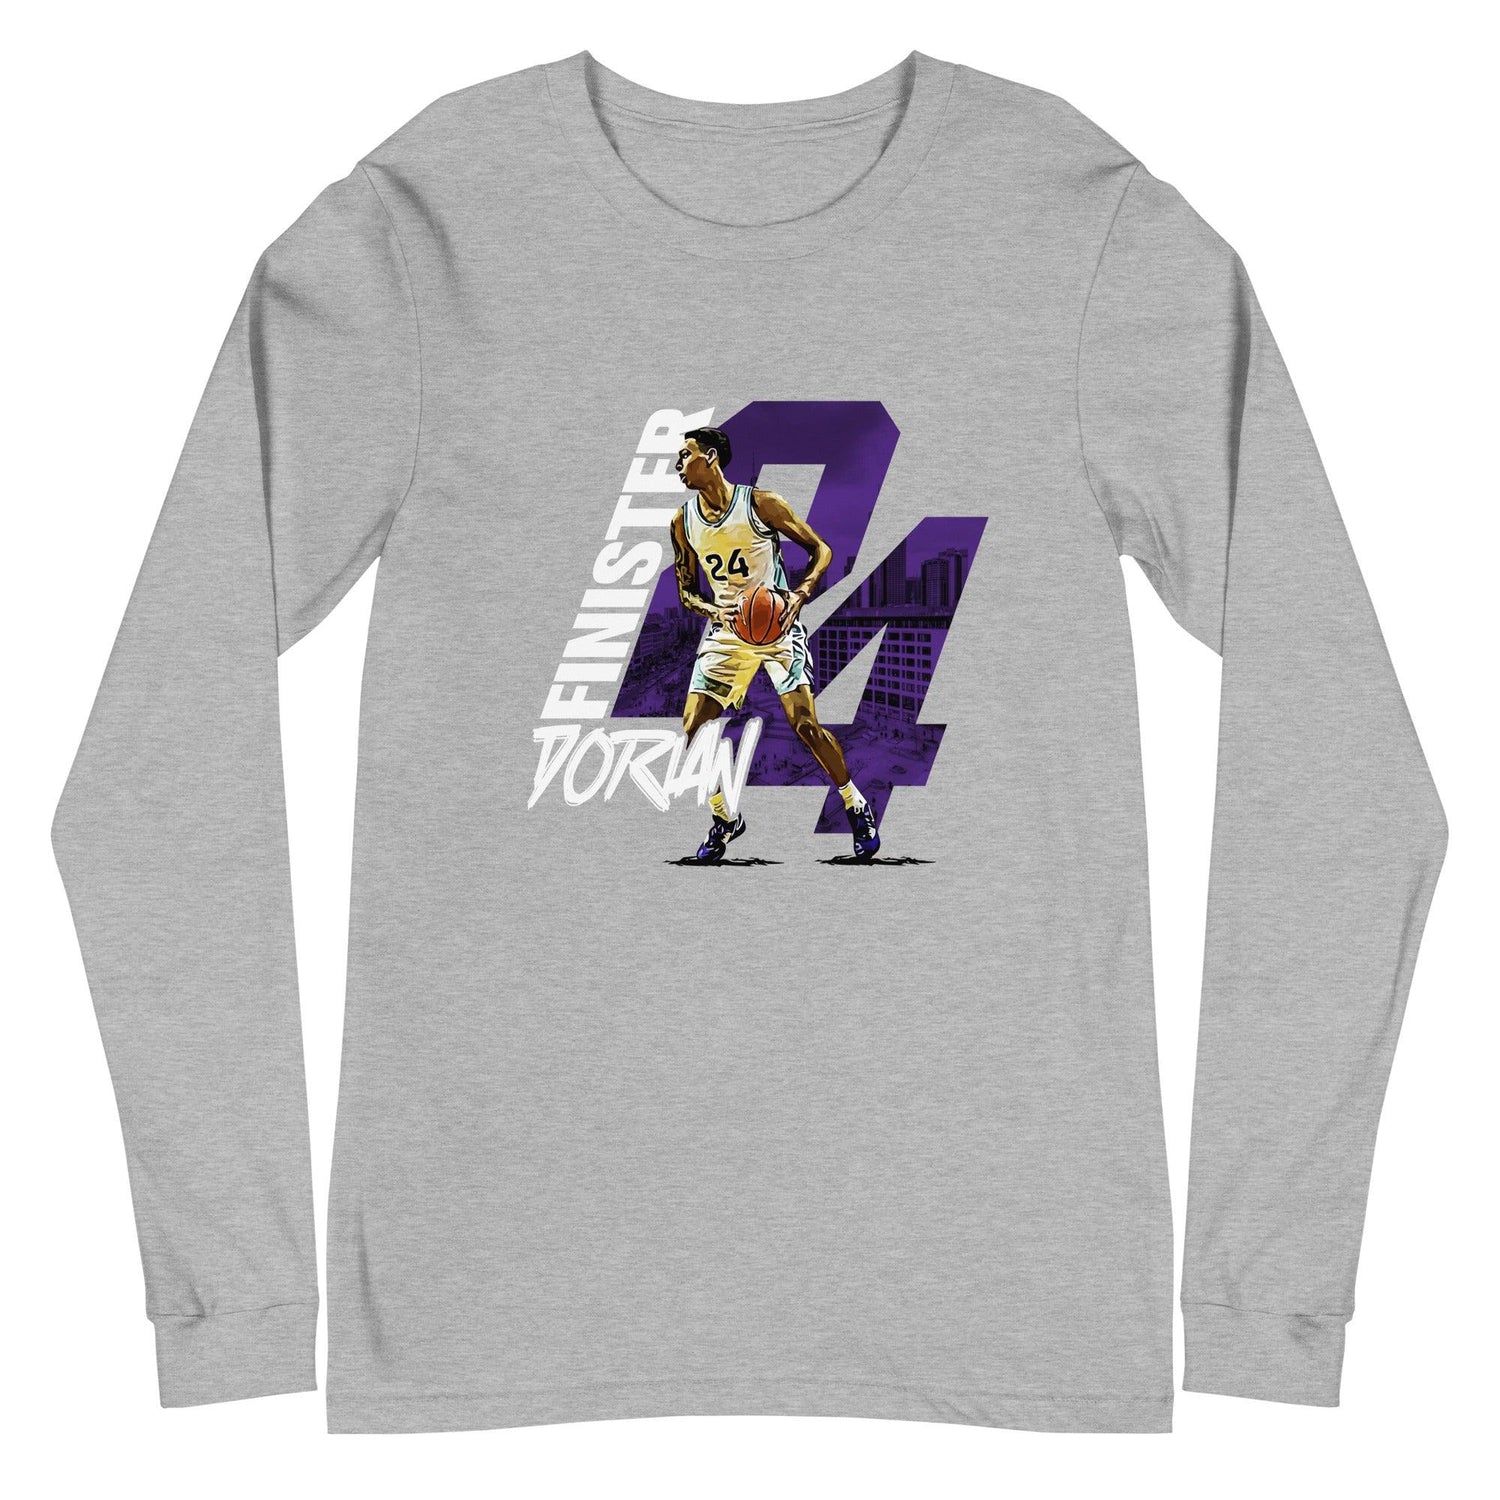 Dorian Finister "Gameday" Long Sleeve Tee - Fan Arch